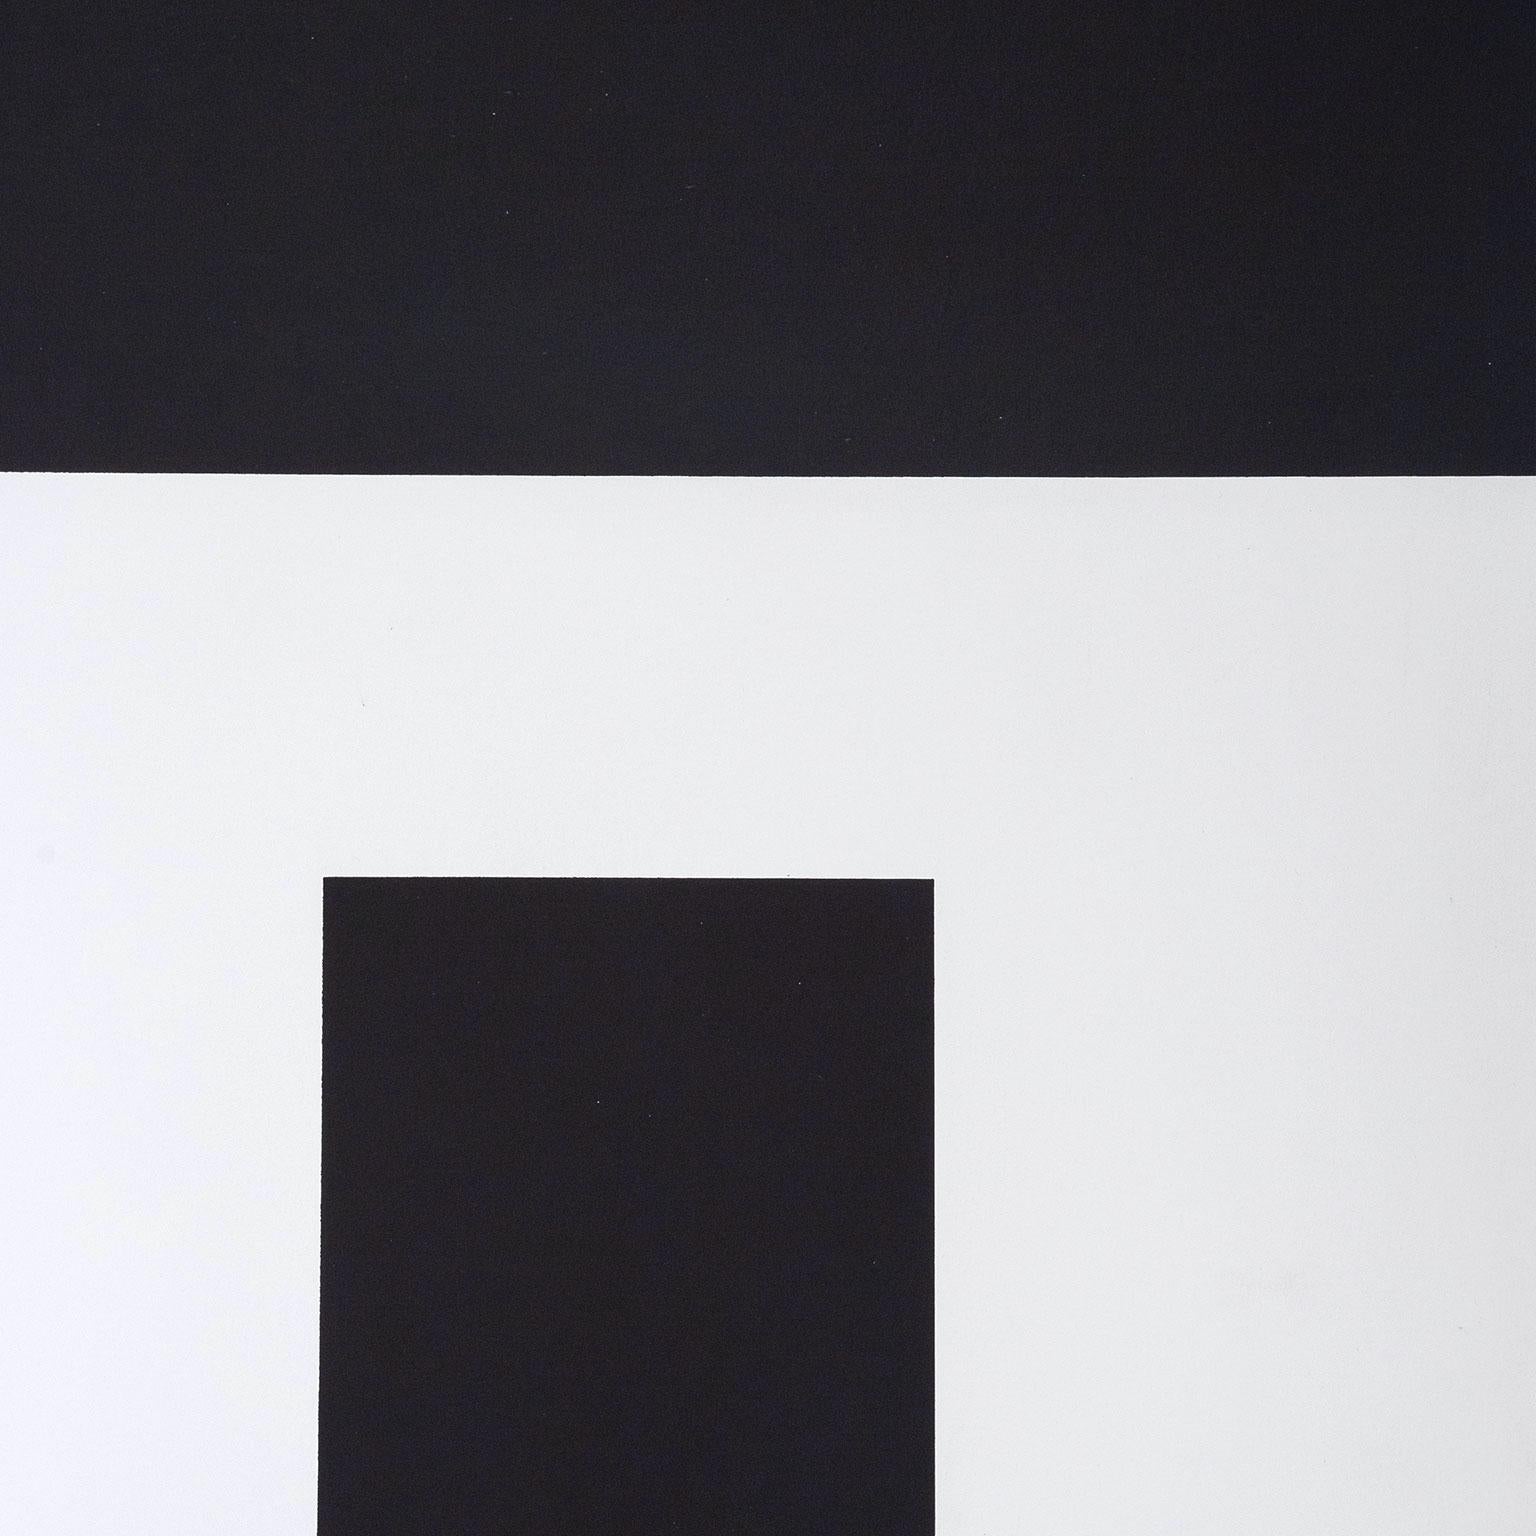 Guido Molinari (1933-2004) is one of Canada's most beloved abstract painters. Among his accomplishments, Molinari represented Canada at the Venice Biennale in 1968.

A disciple of Barnett Newman, Molinari's most iconic works depict alternating bands